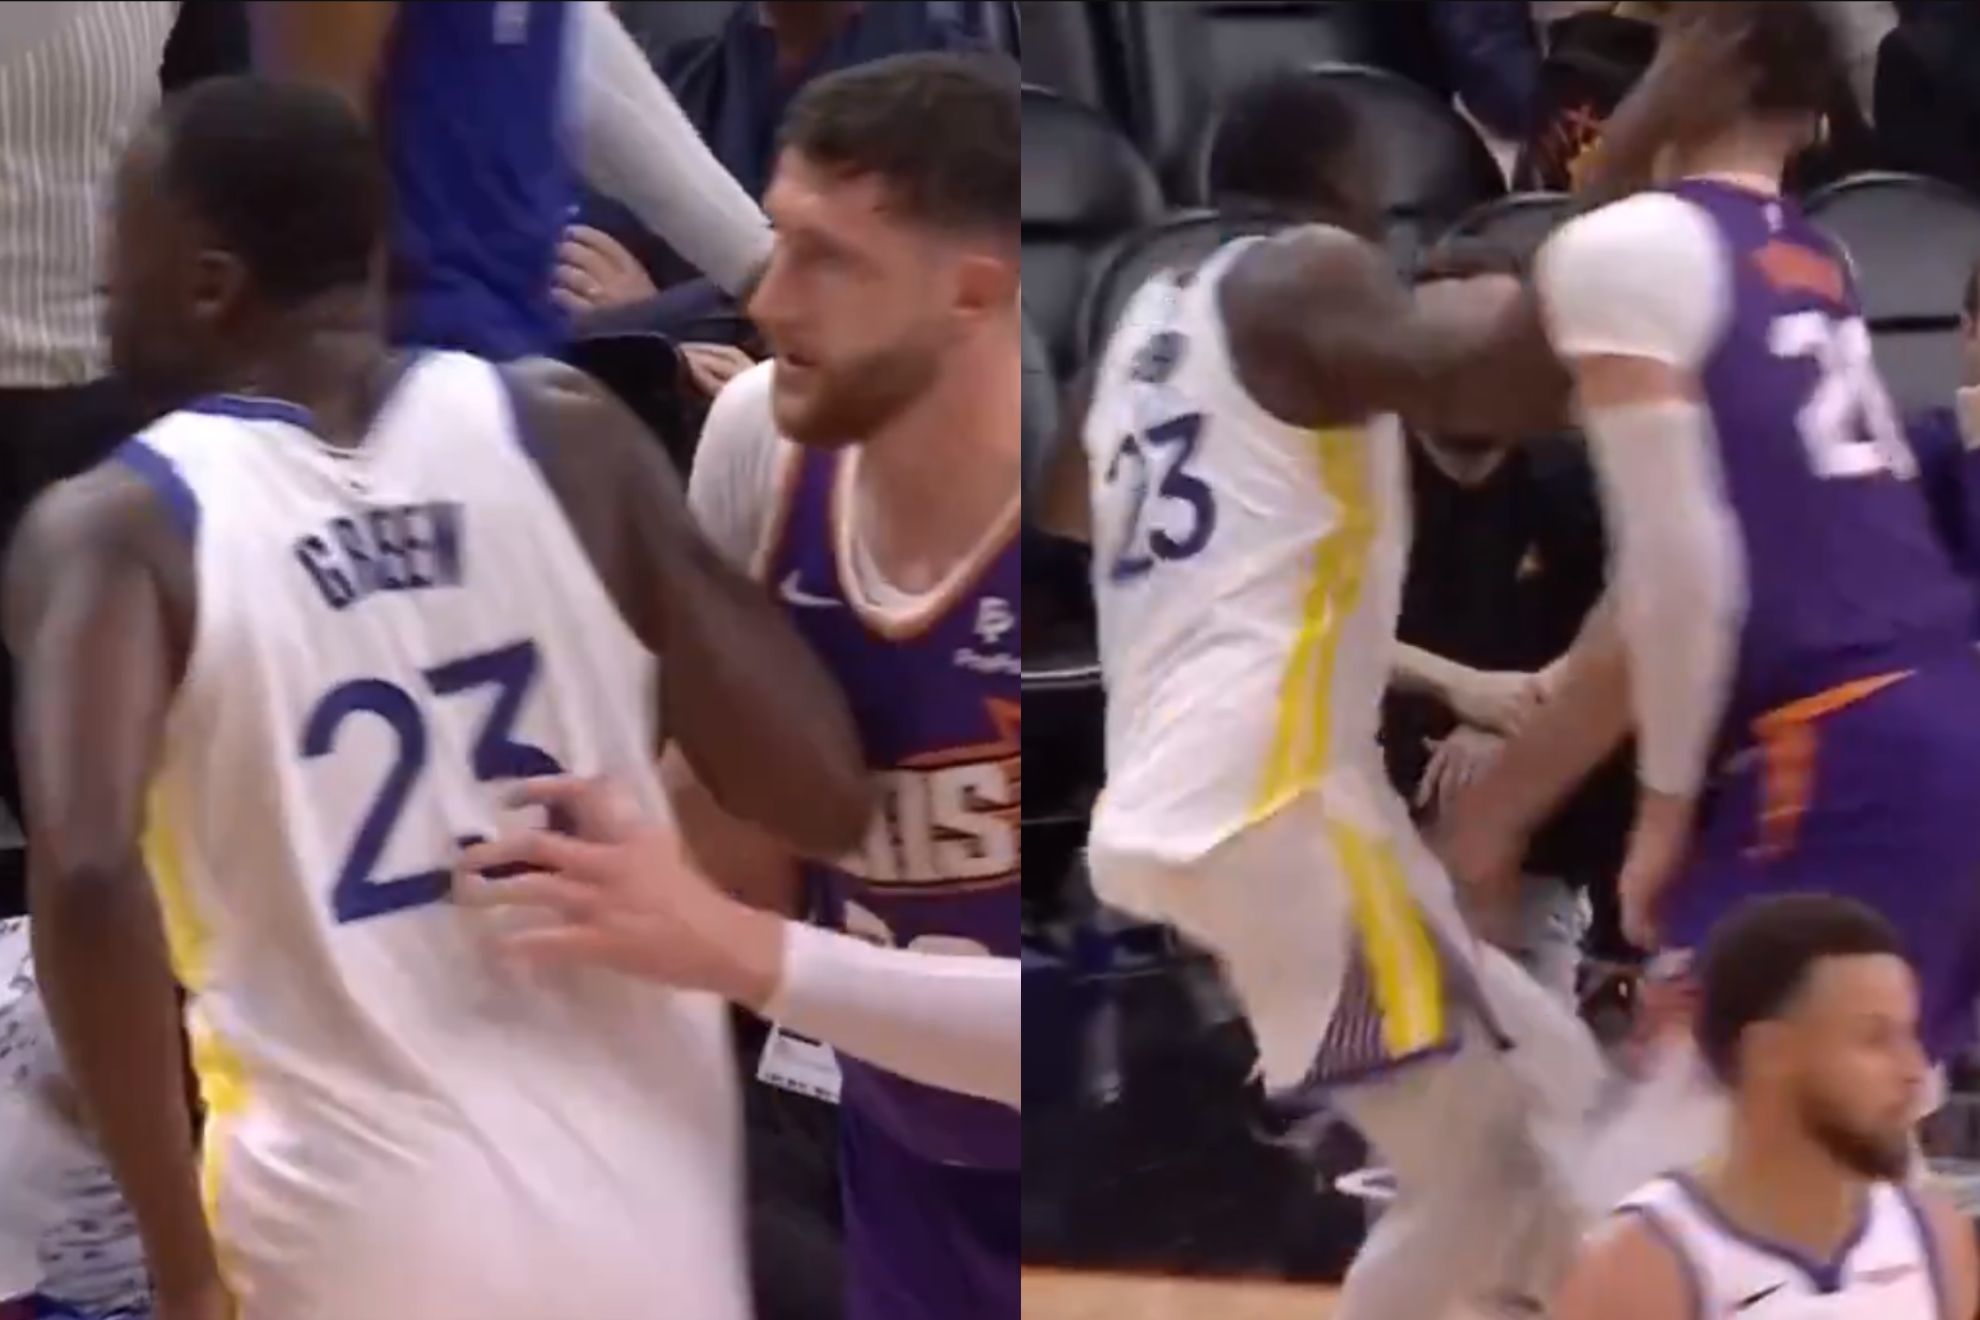 Draymond Green was ejected after flagrant foul on Nurkic.